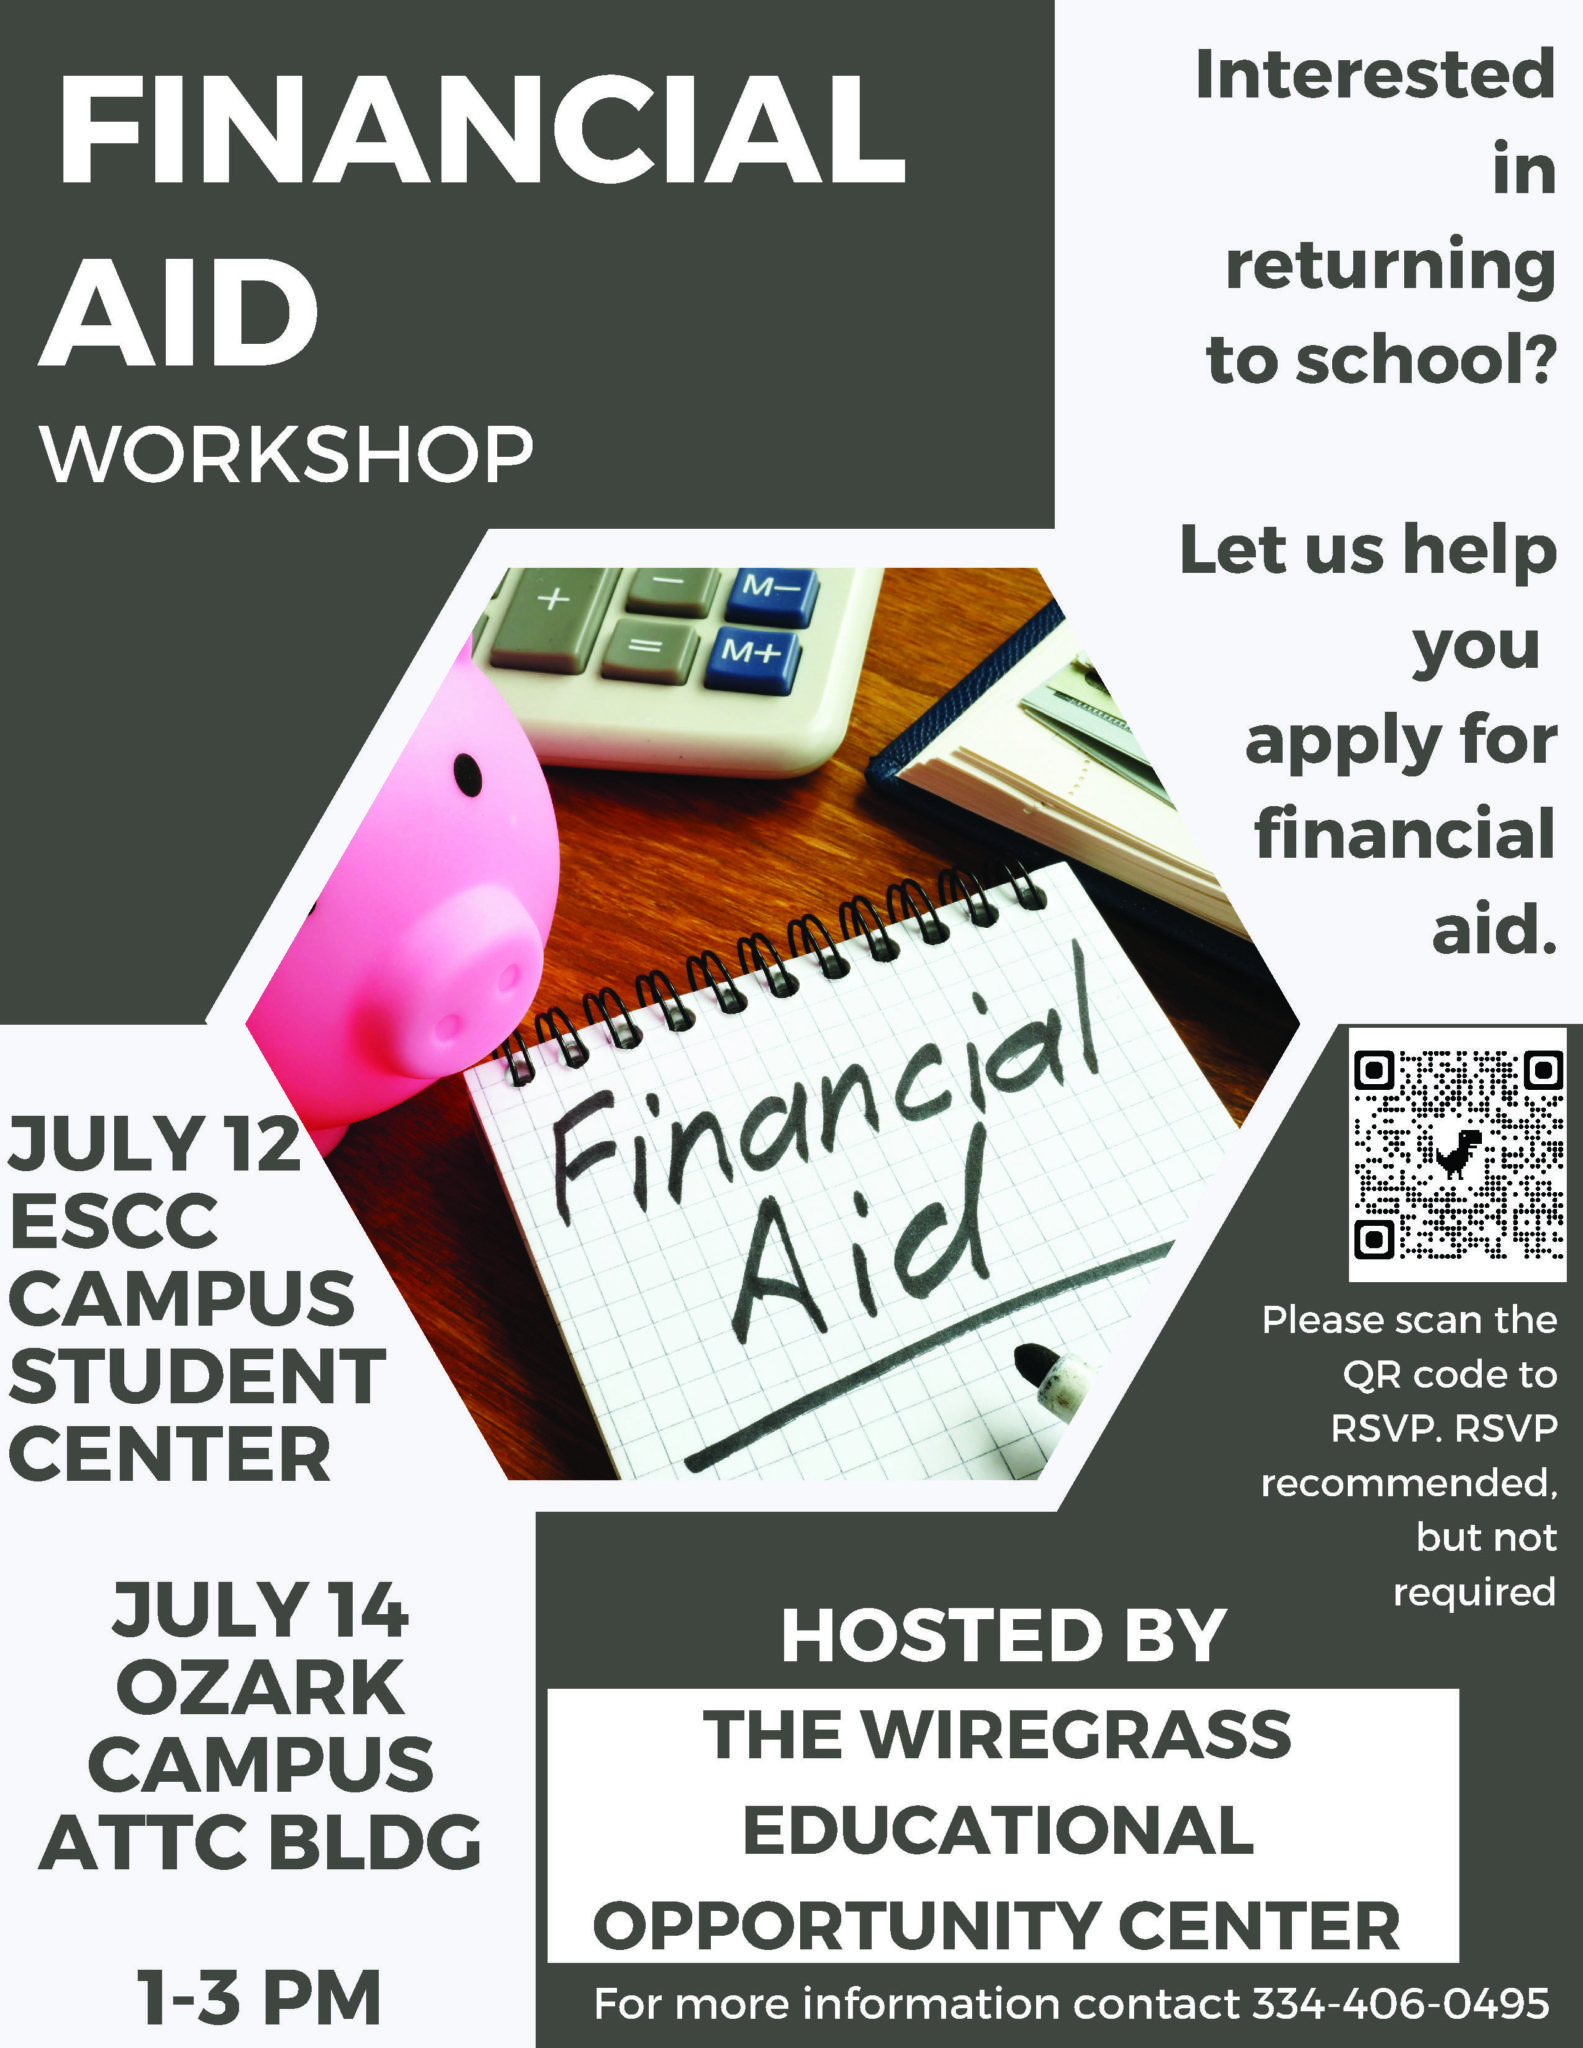 Wiregrass EOC to hold Financial Aid Workshops